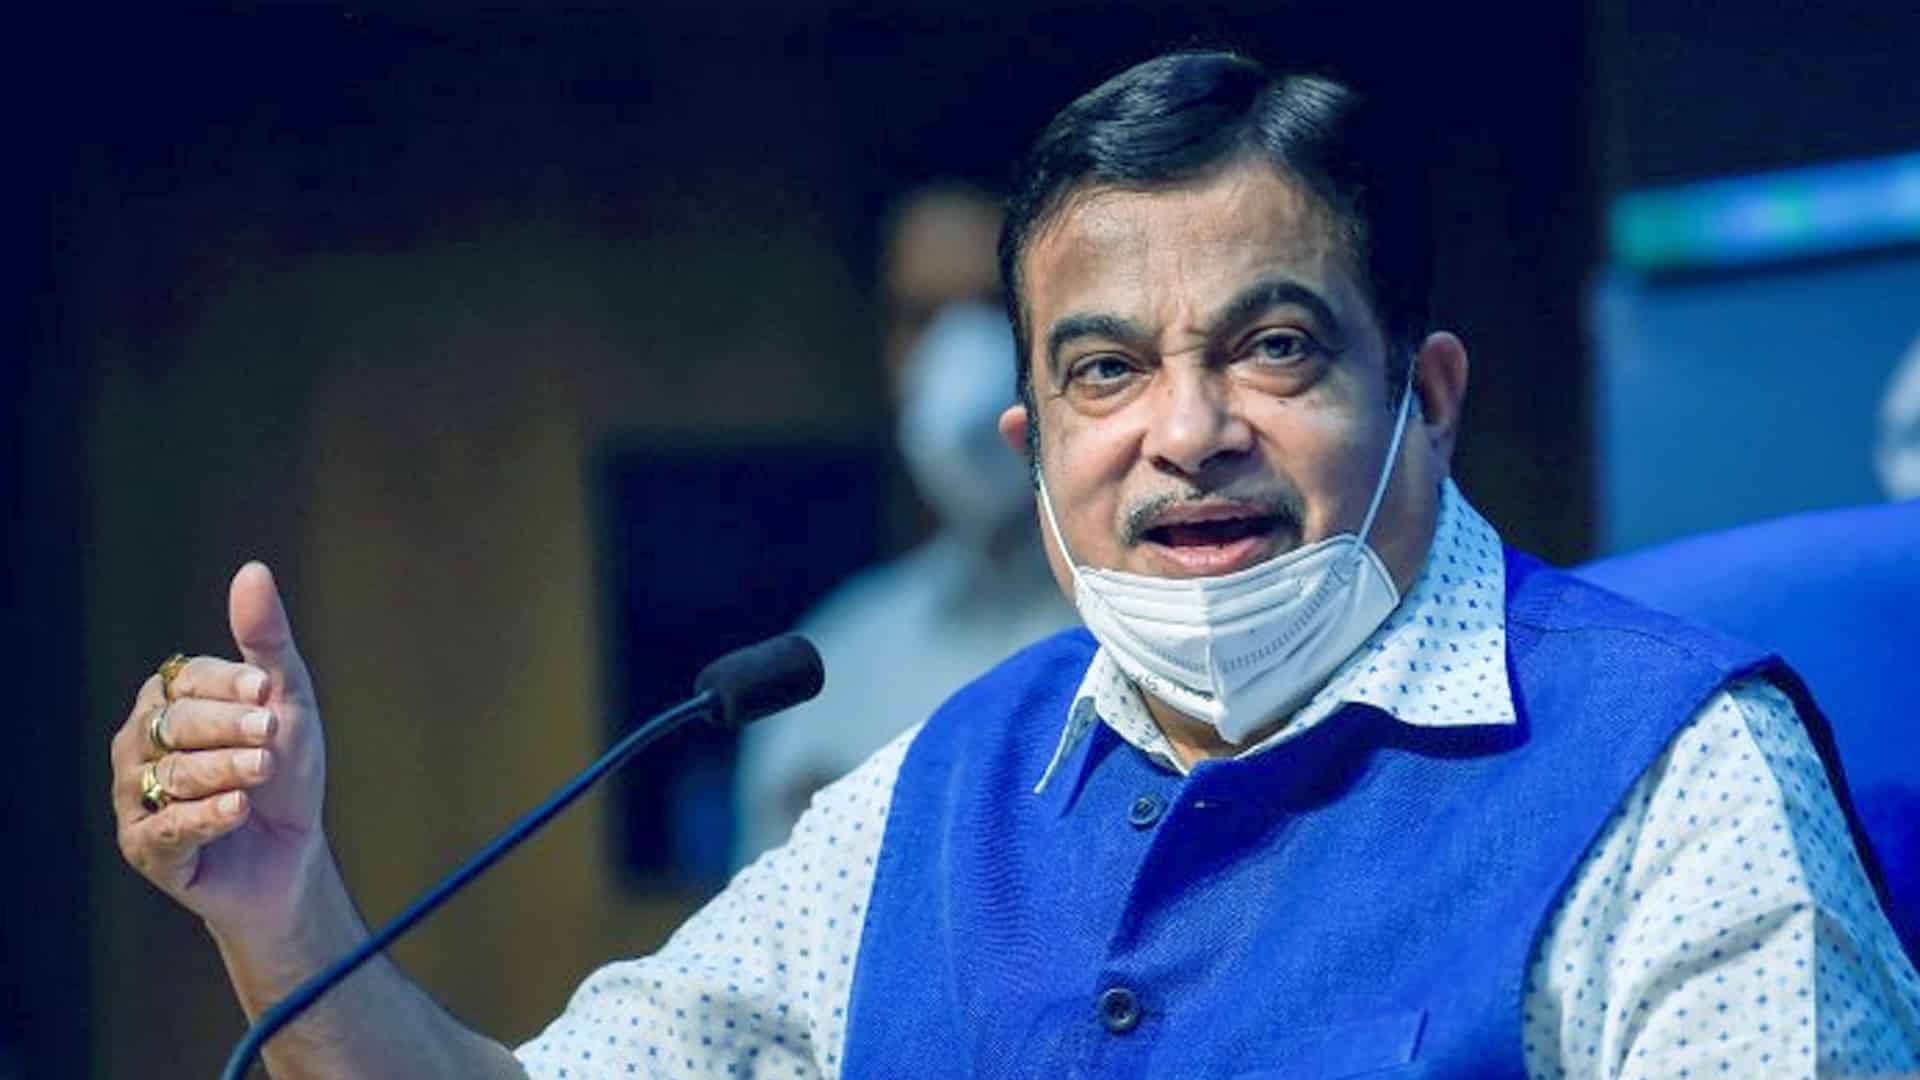 Govt intends to have EV sales penetration of 30 pc for private cars by 2030: Gadkari